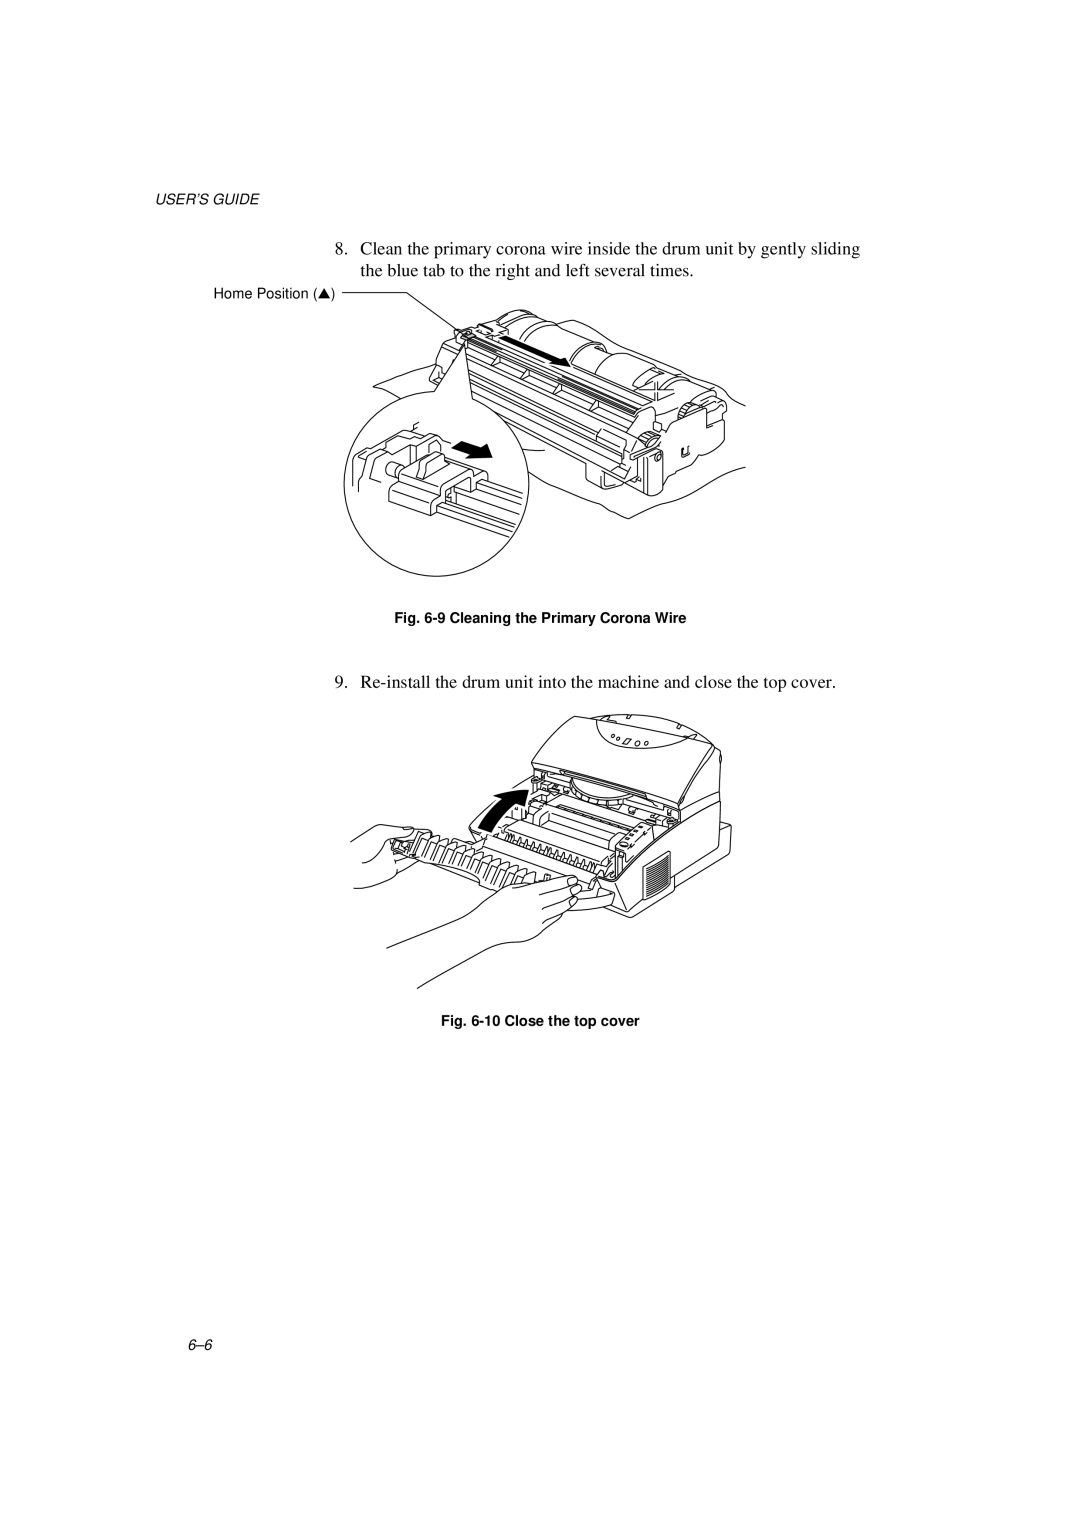 Brother MFC/HL-P2000 manual Re-install the drum unit into the machine and close the top cover, User’S Guide 